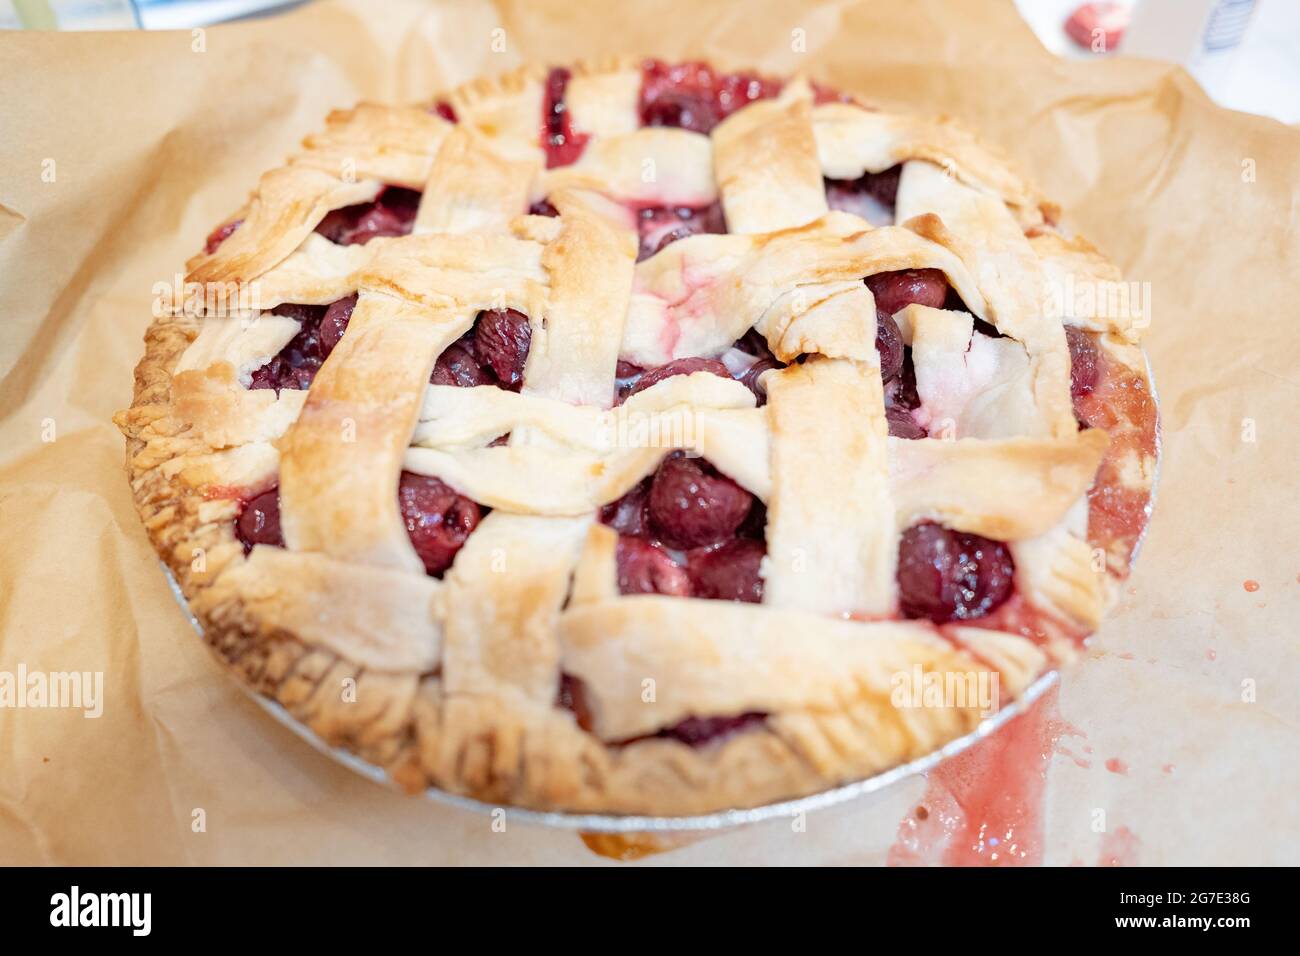 Finished pie cooling during baking of a homemade cherry pie, Lafayette, California, June 17, 2021. () Stock Photo